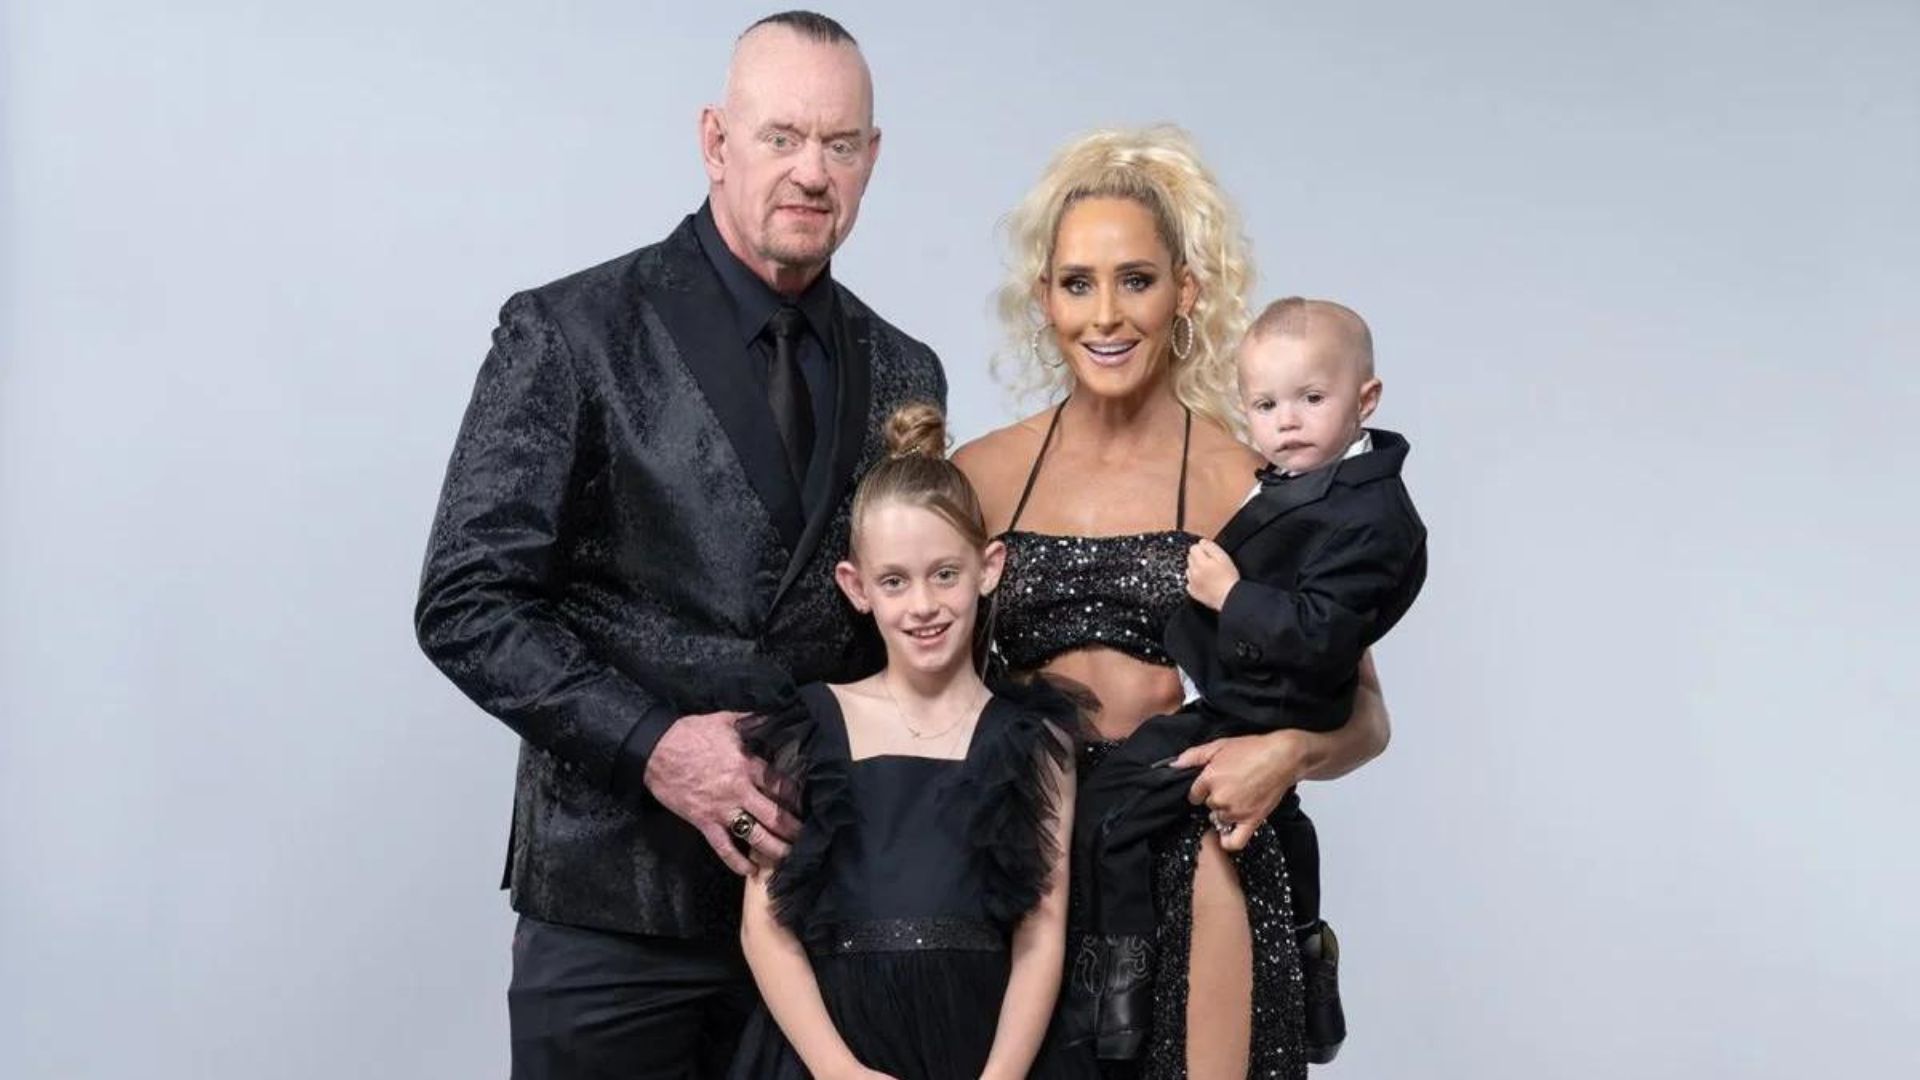 The Undertaker and his family at the WWE Hall of Fame ceremony